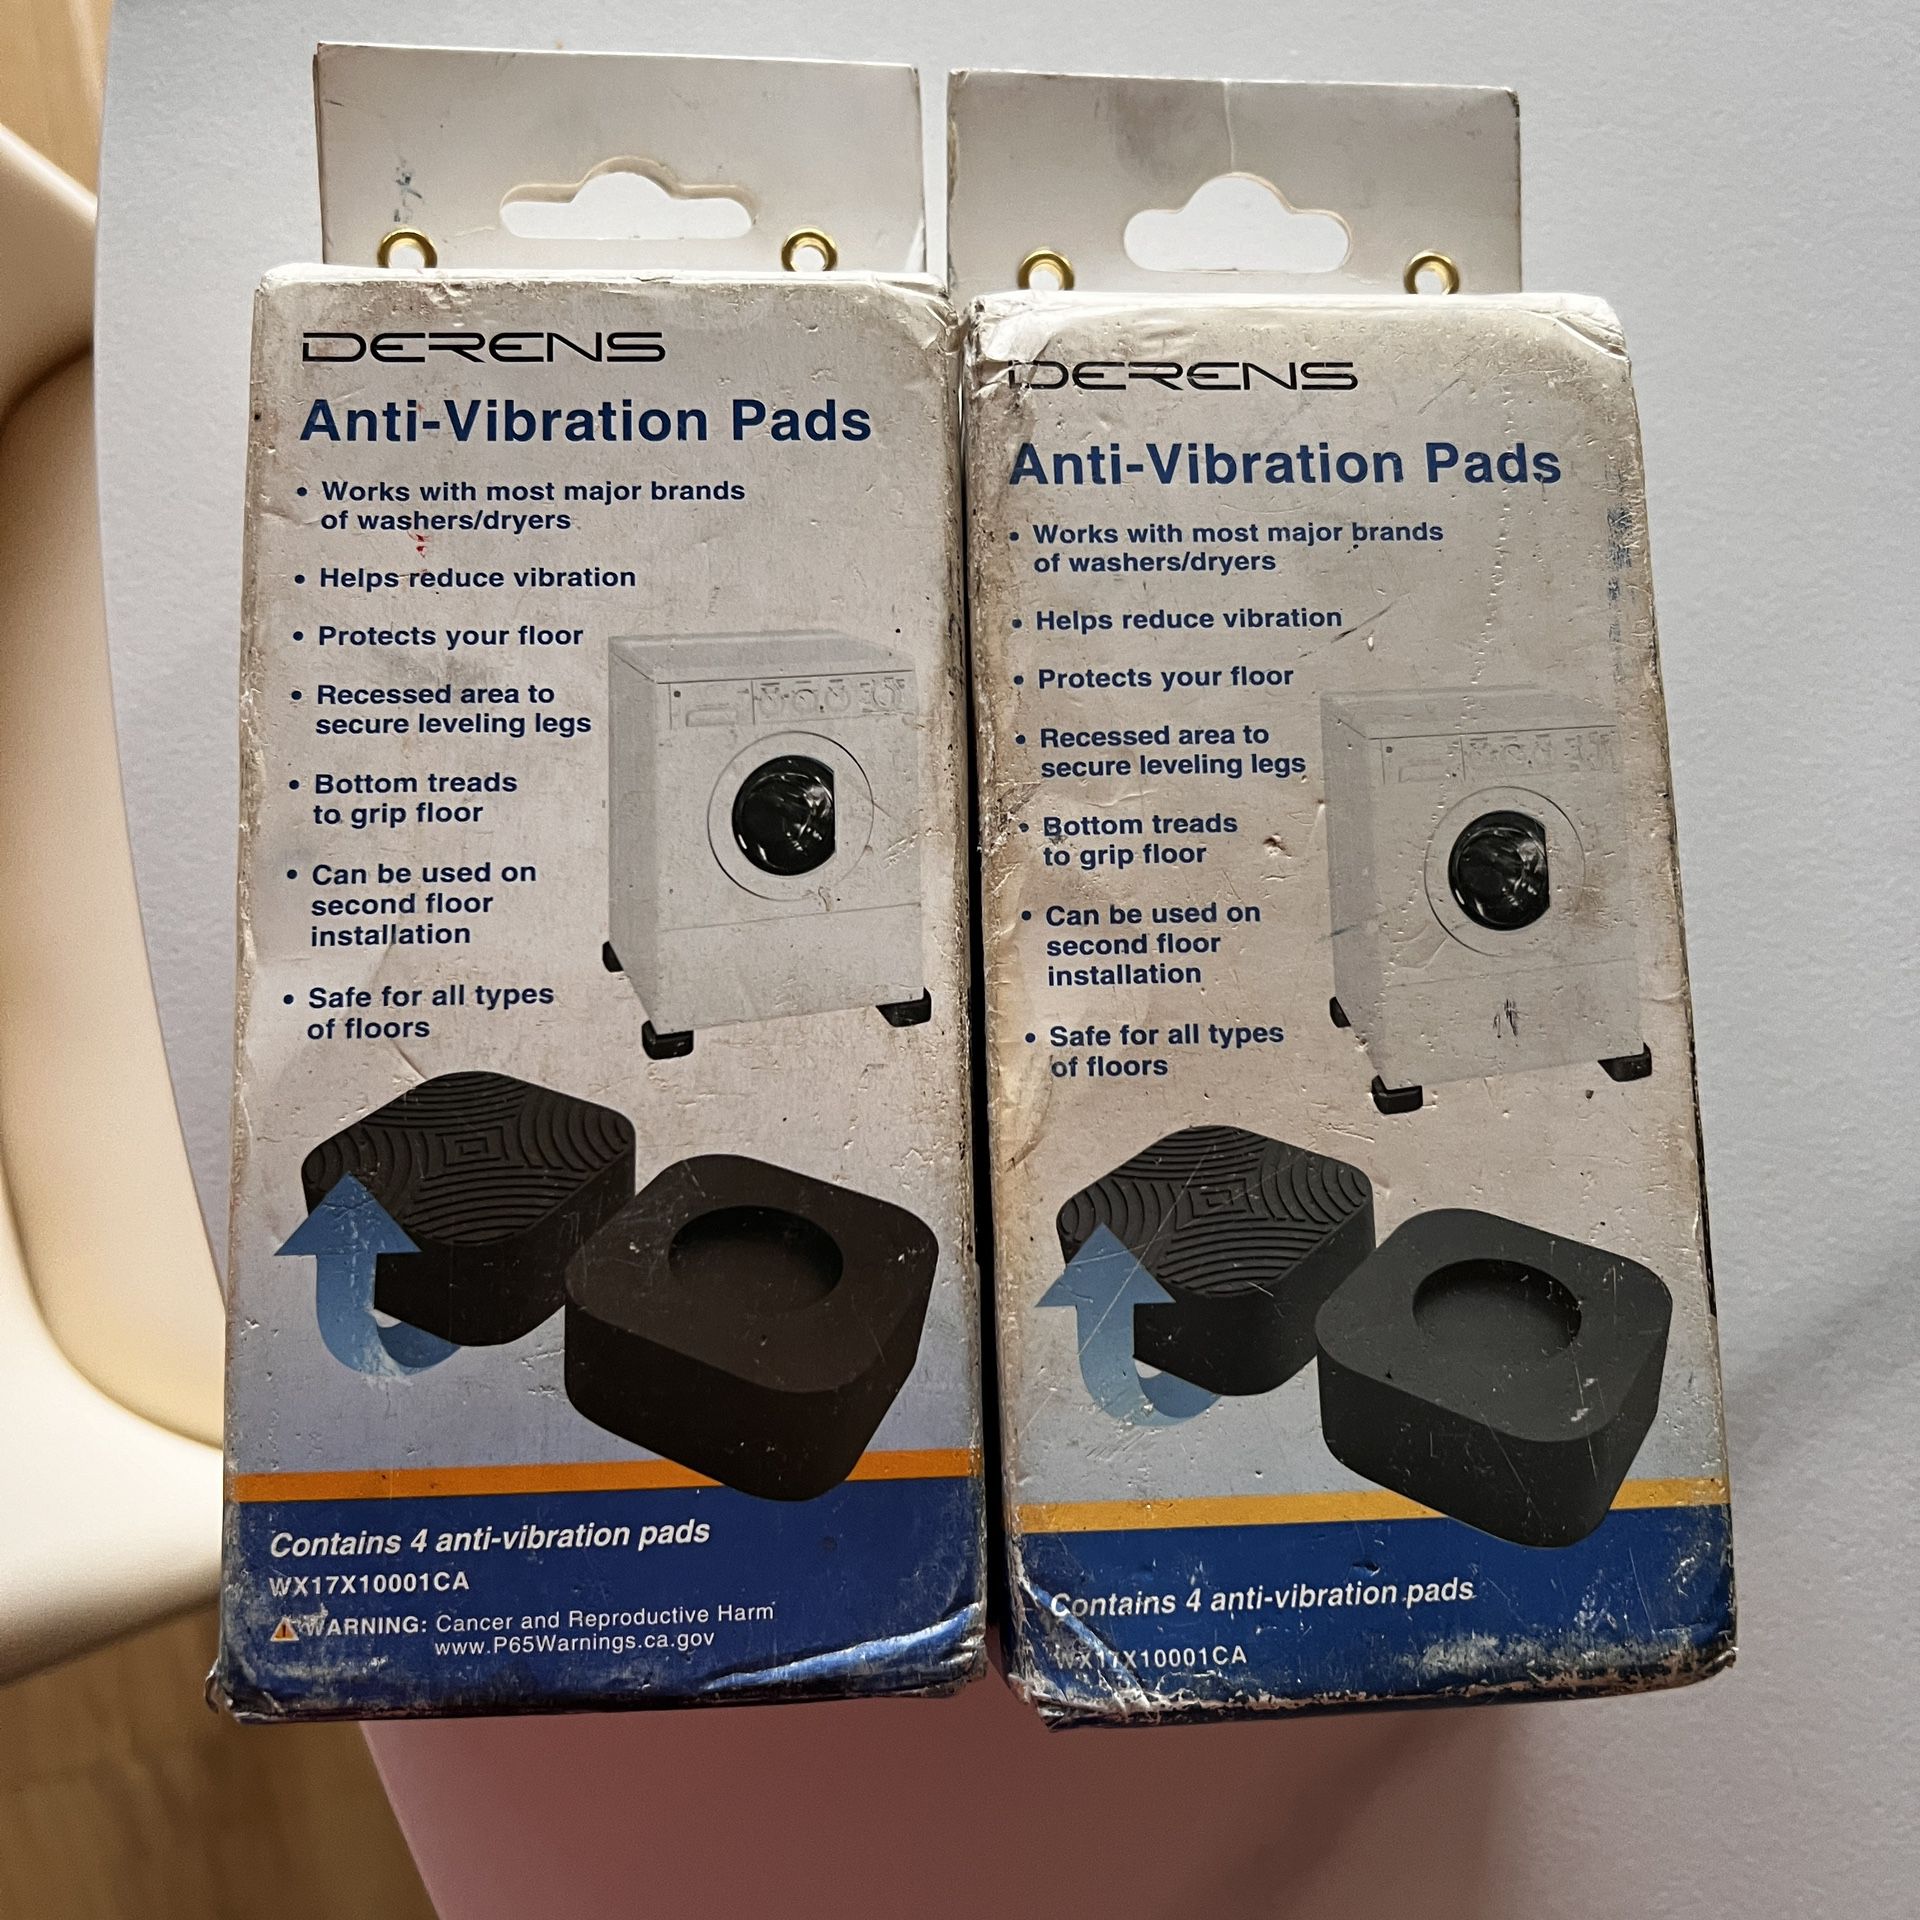 Anti-Vibration Pads for Washer and Dryer (8 ct)